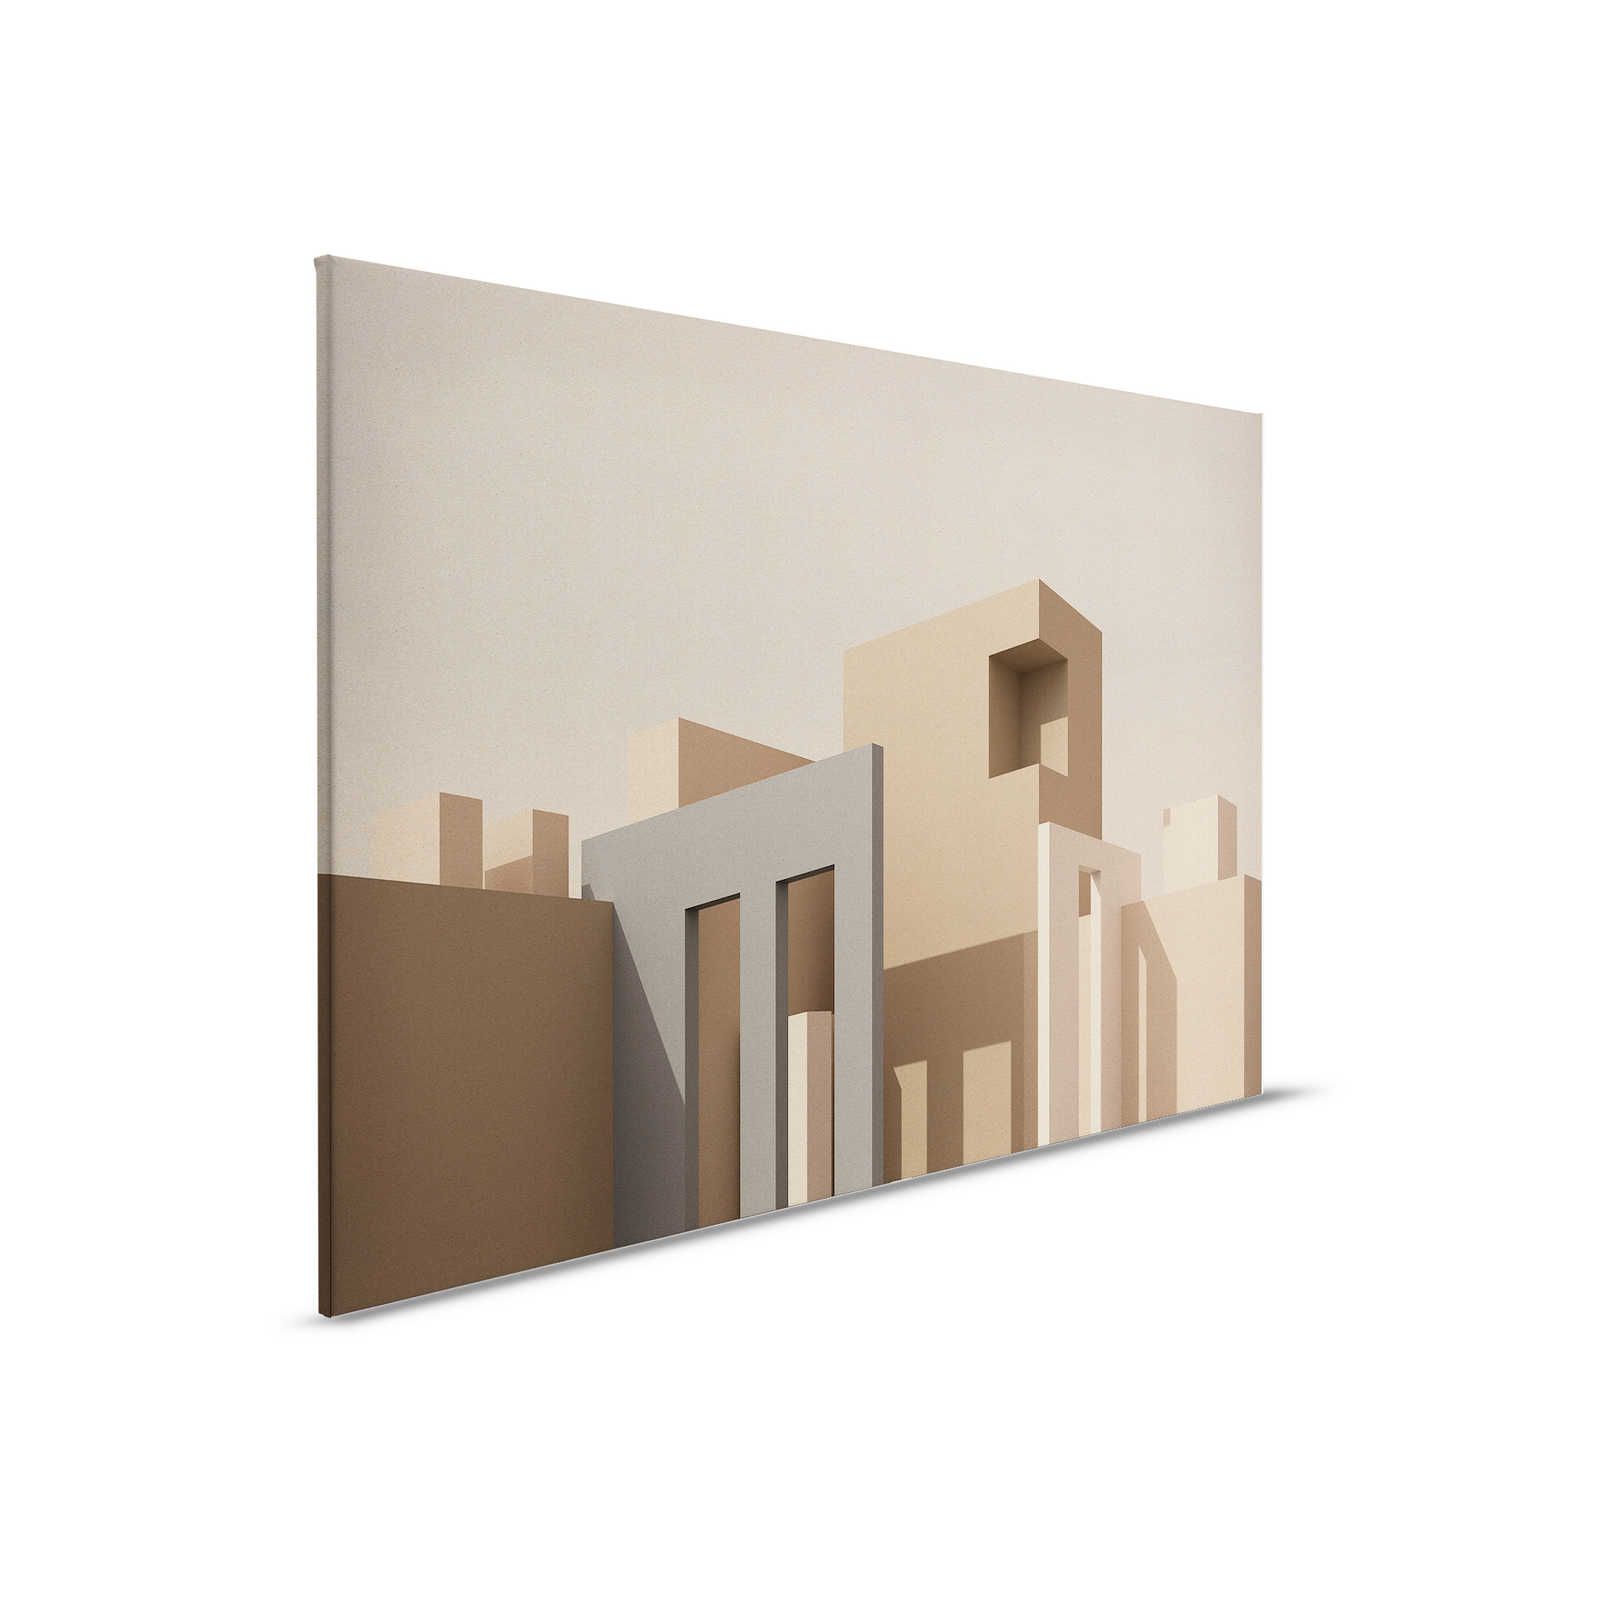         Tangier 1 - Canvas painting Architecture Cube Design in Beige & Grey - 0,90 m x 0,60 m
    